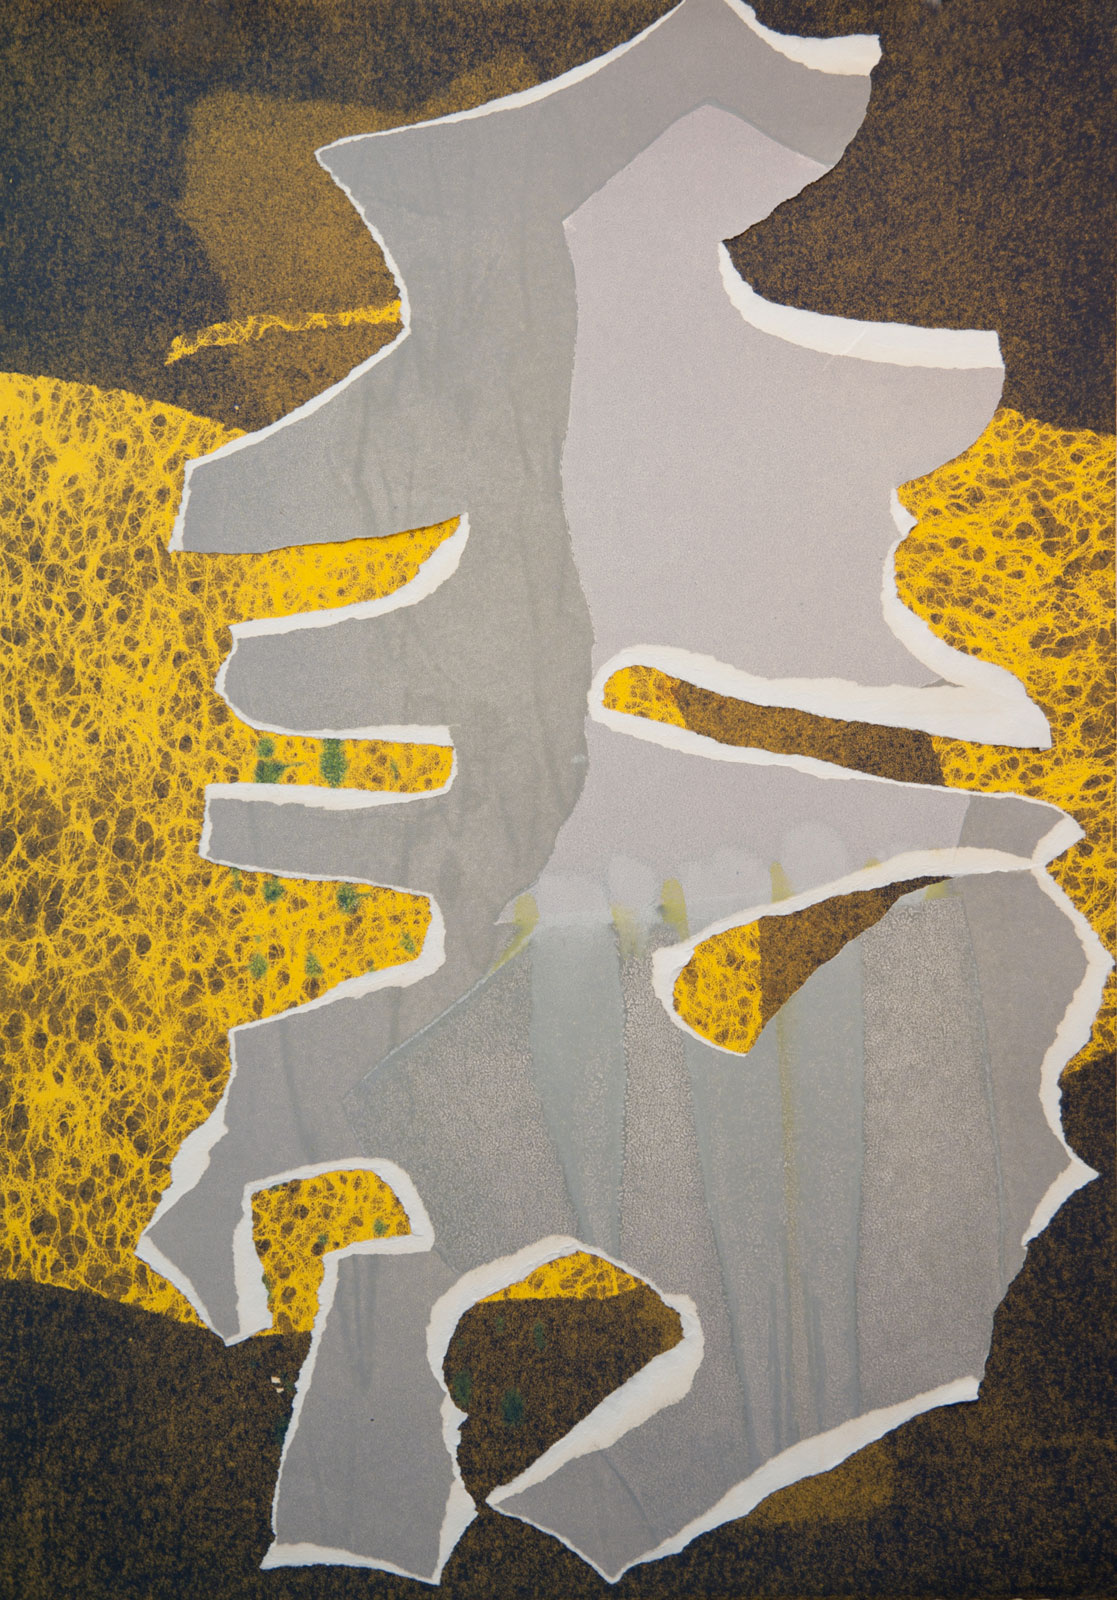 Monotypes-Vertical Vessels, Torgiano, 2010